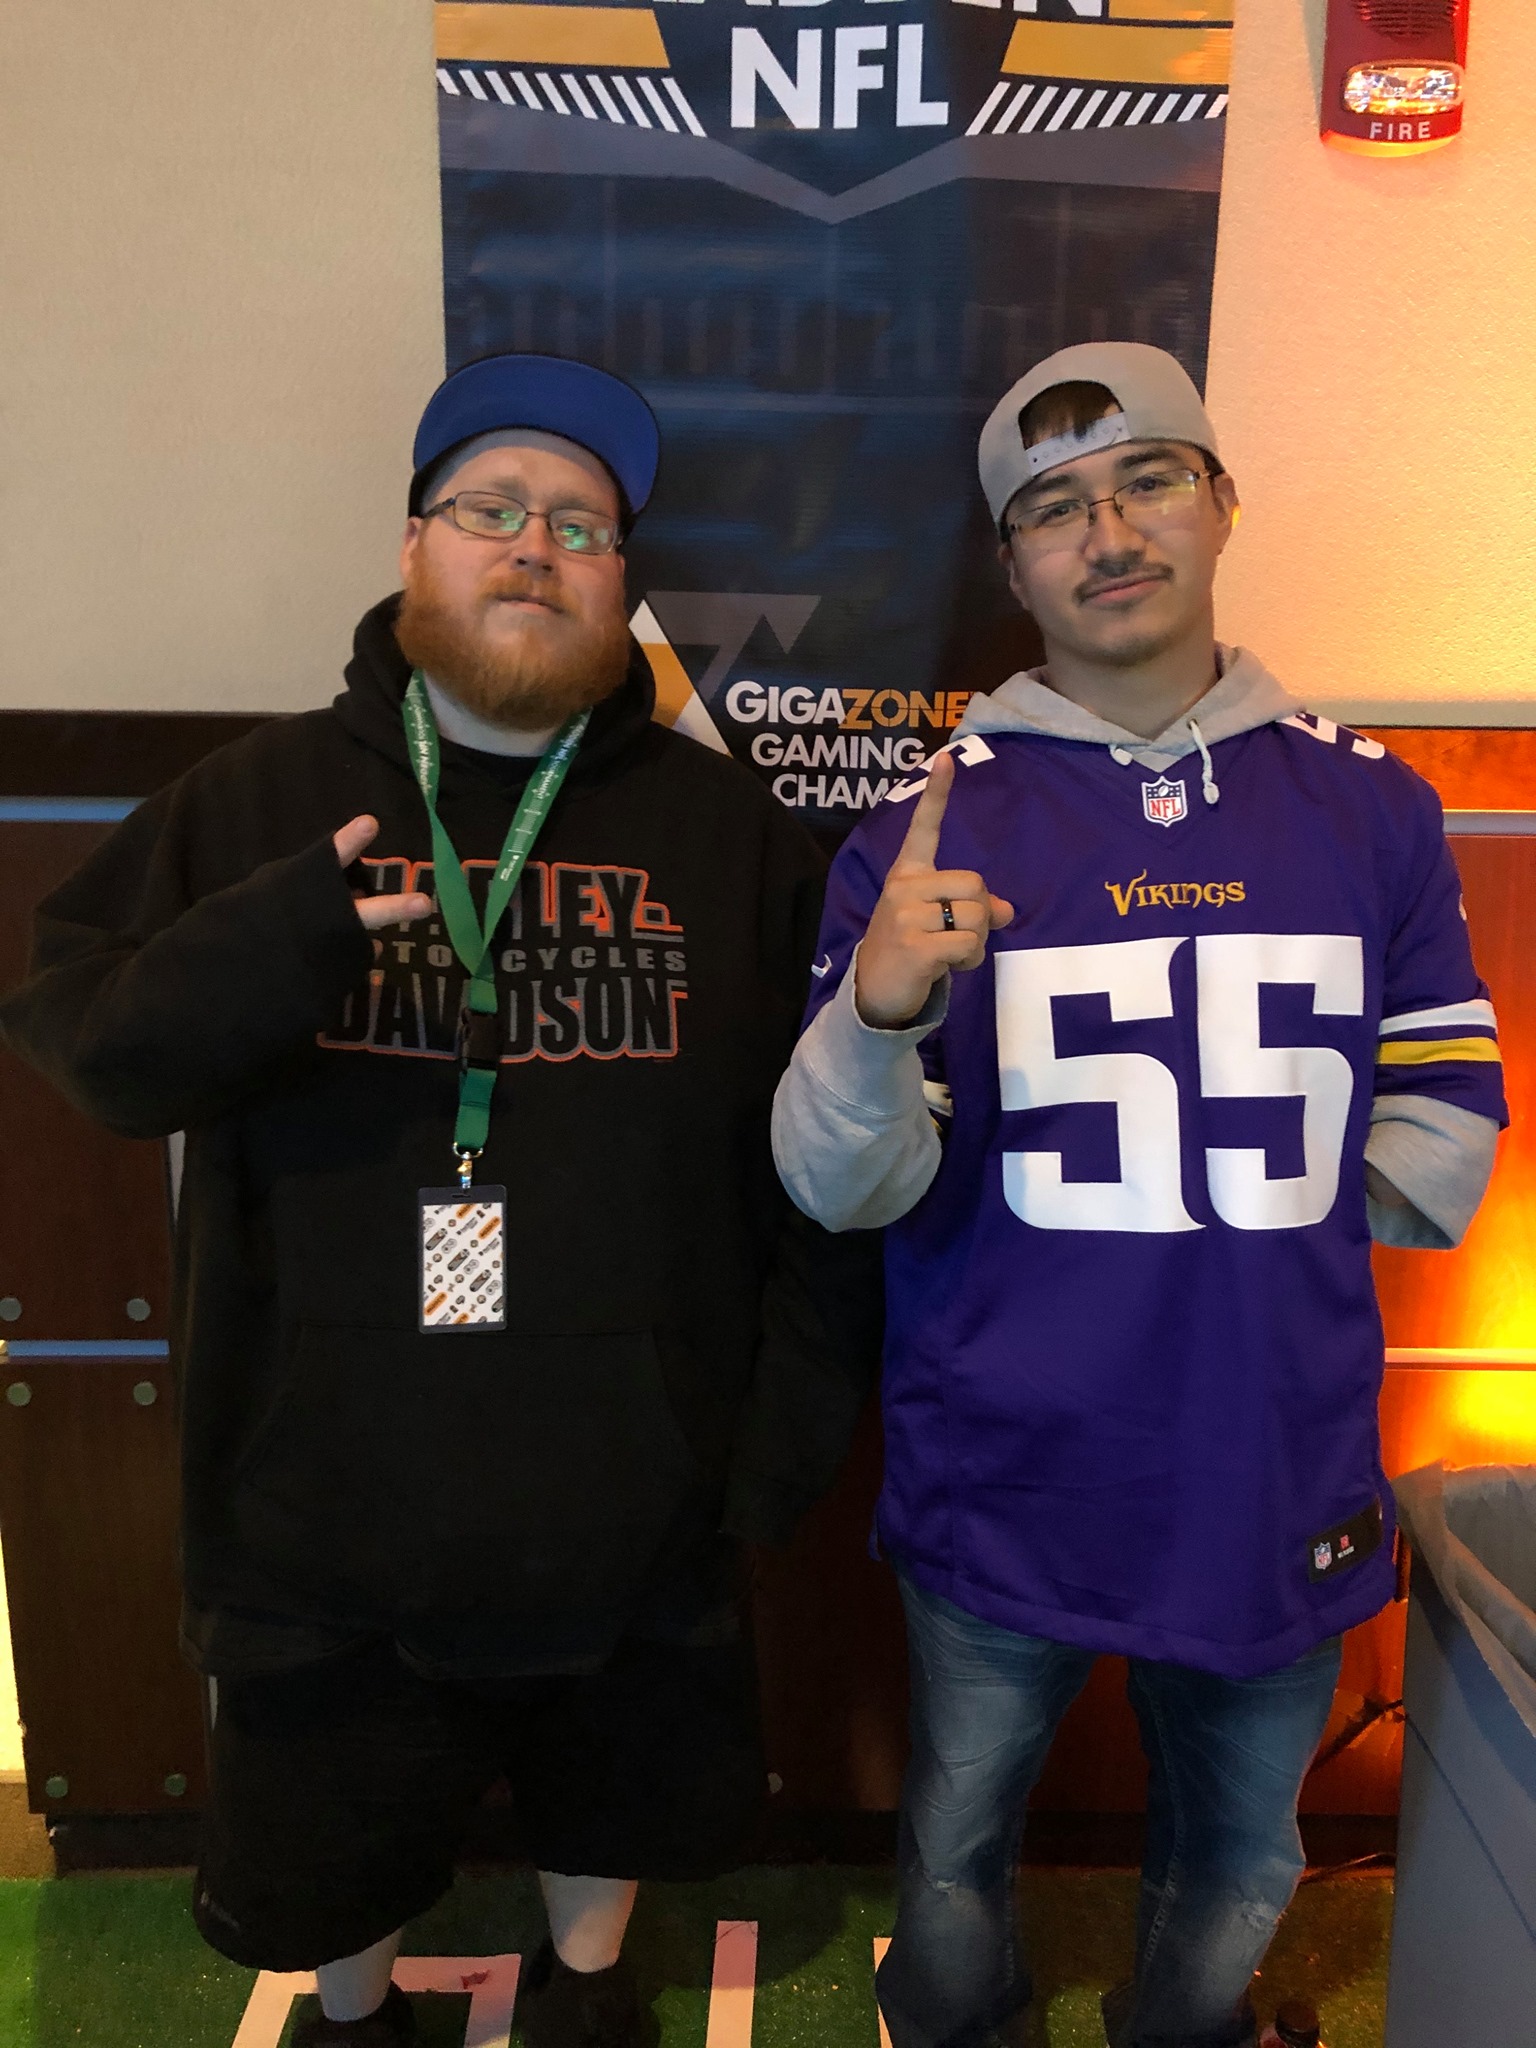 Madden NFL 20 1st place goes to Emery Skinaway of Red Lake and 2nd place goes to Brandon Miller of Brainerd at #GZGC19